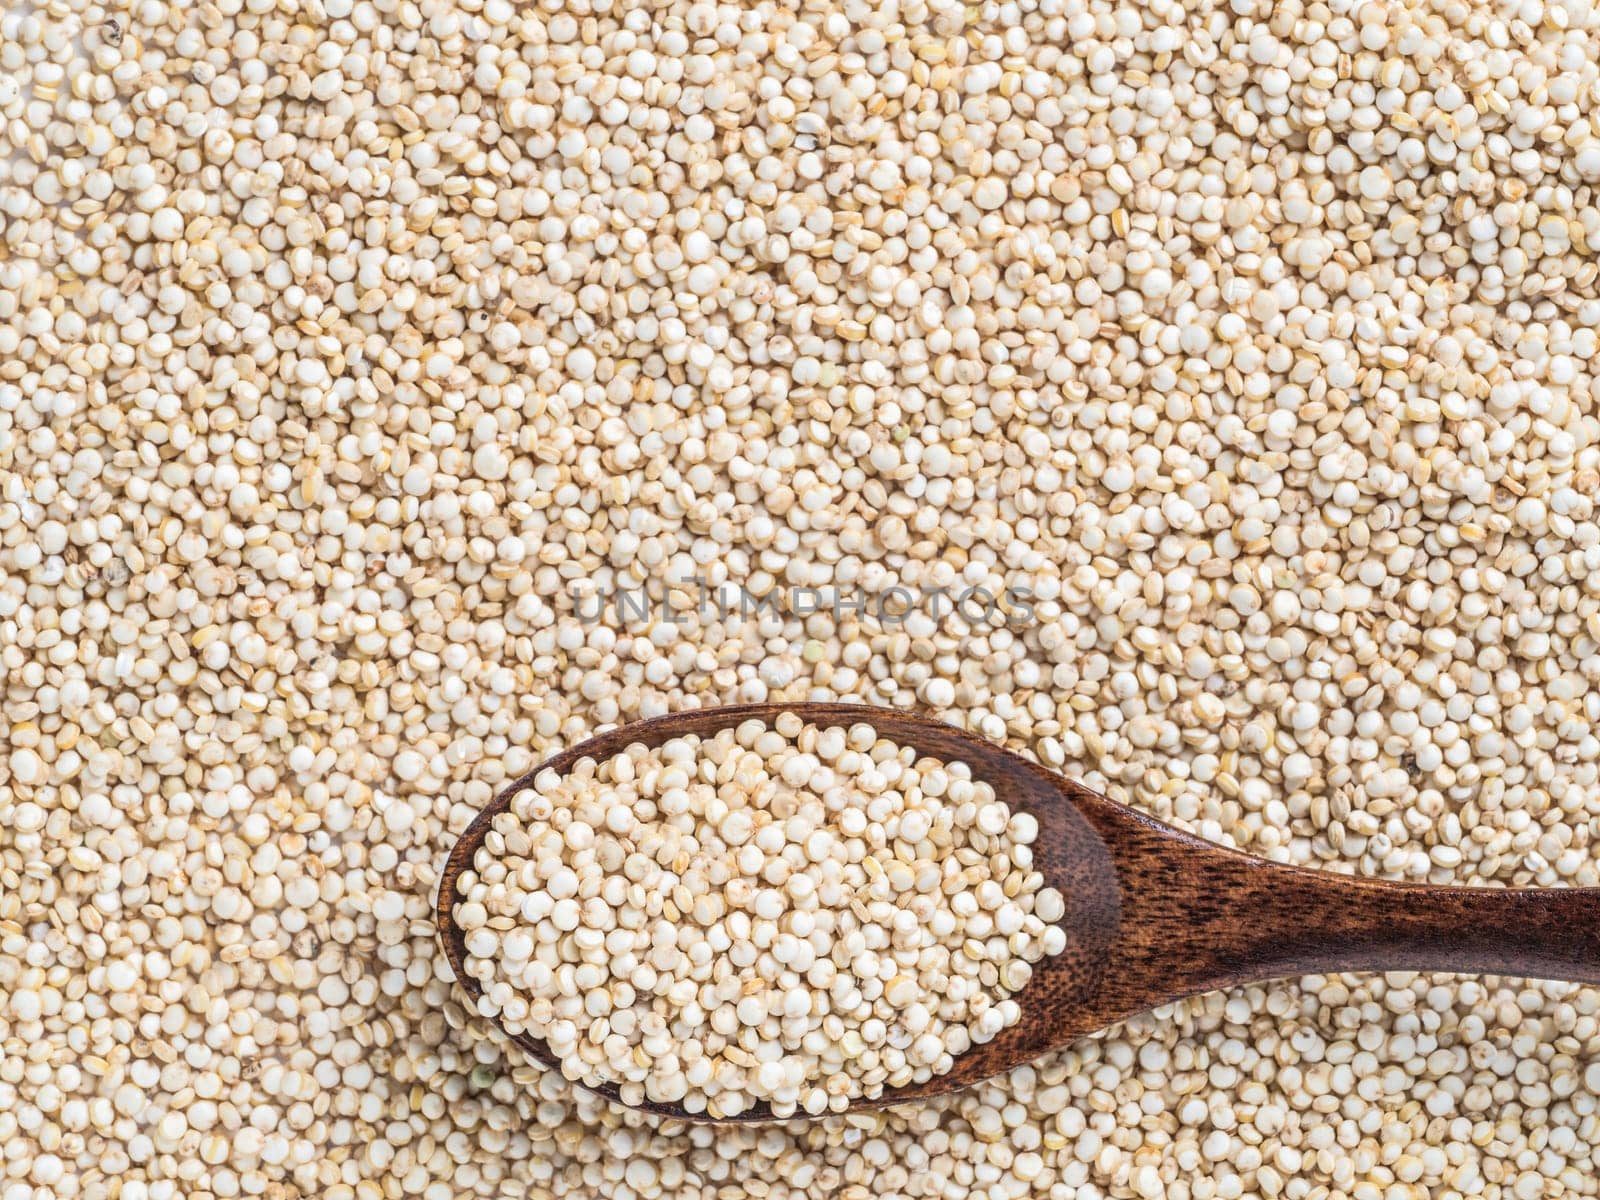 Grain of quinoa. Uncooked raw quinoa as background. Top view of quinoa with grains in wooden spoon. Copy space.